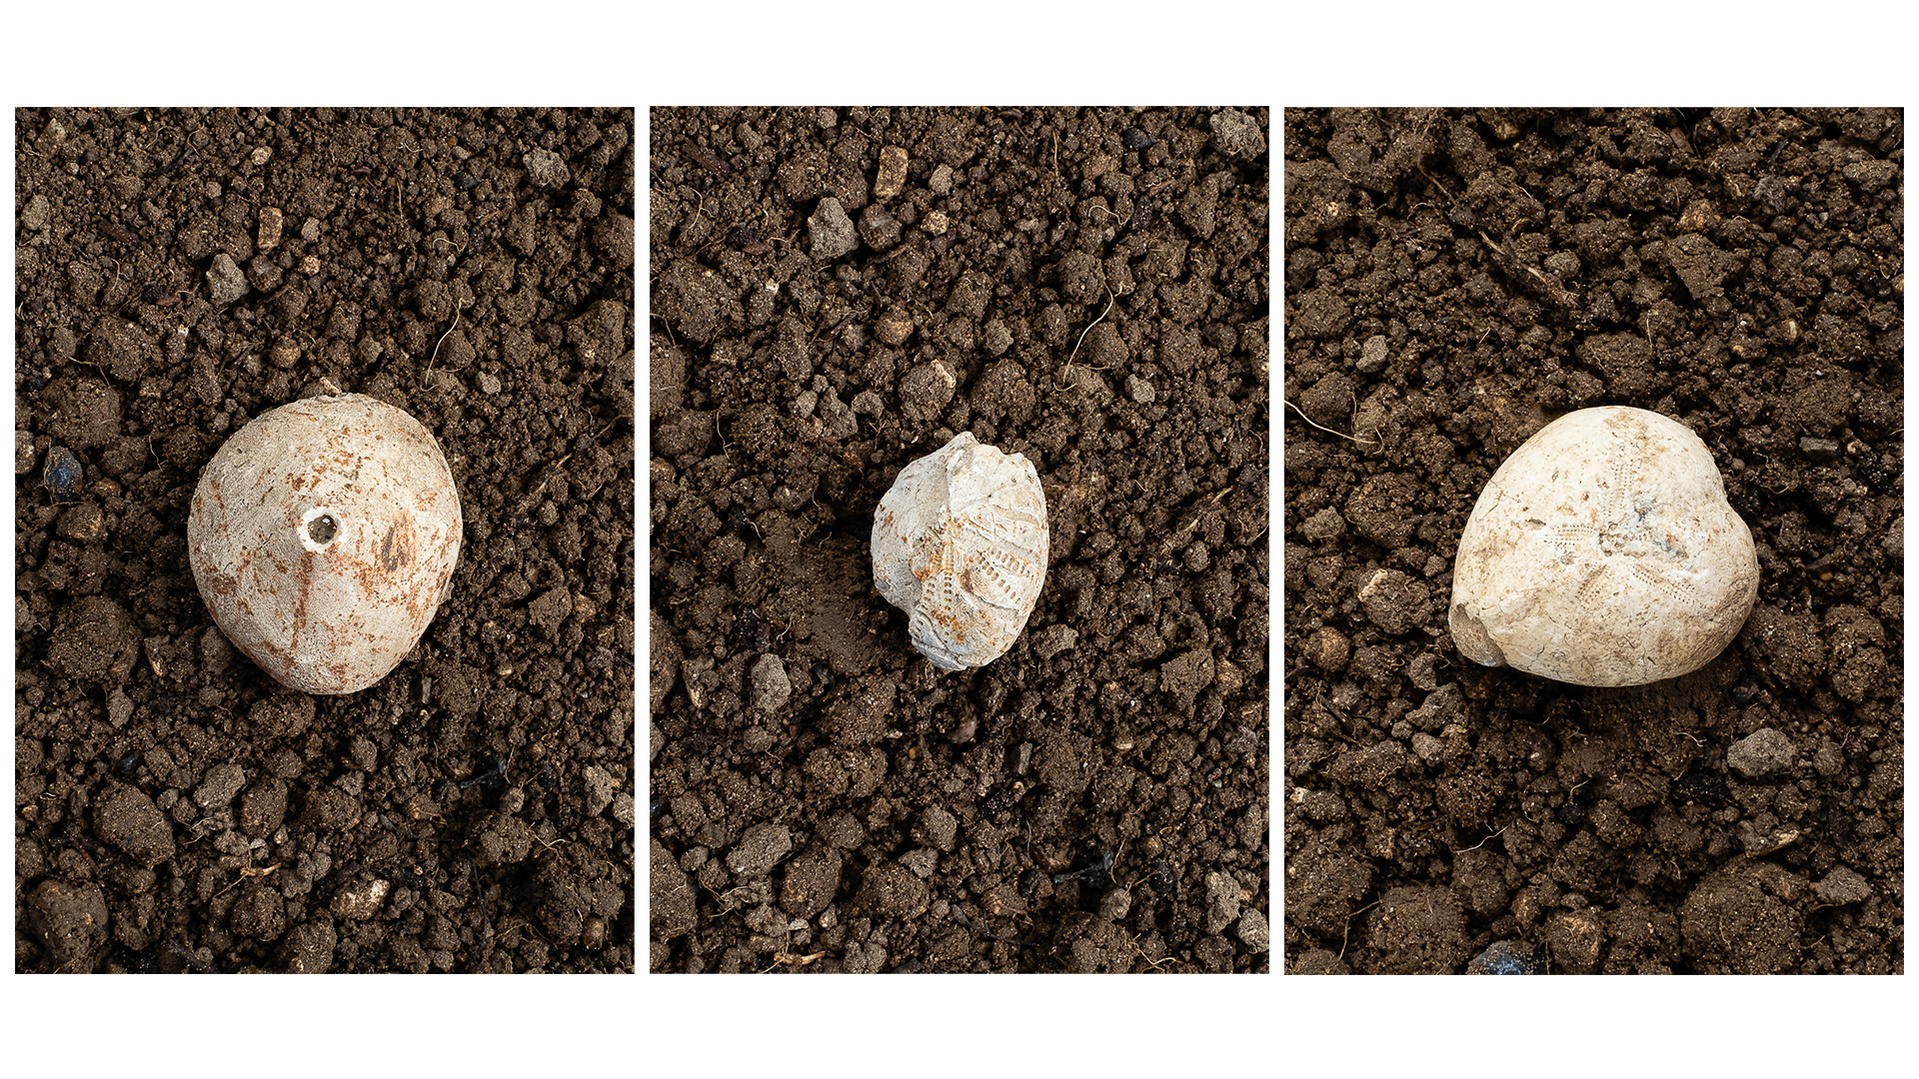 Colour photographs of three fossils; a keyhole limpet and two different micrasters, displayed set in soil.